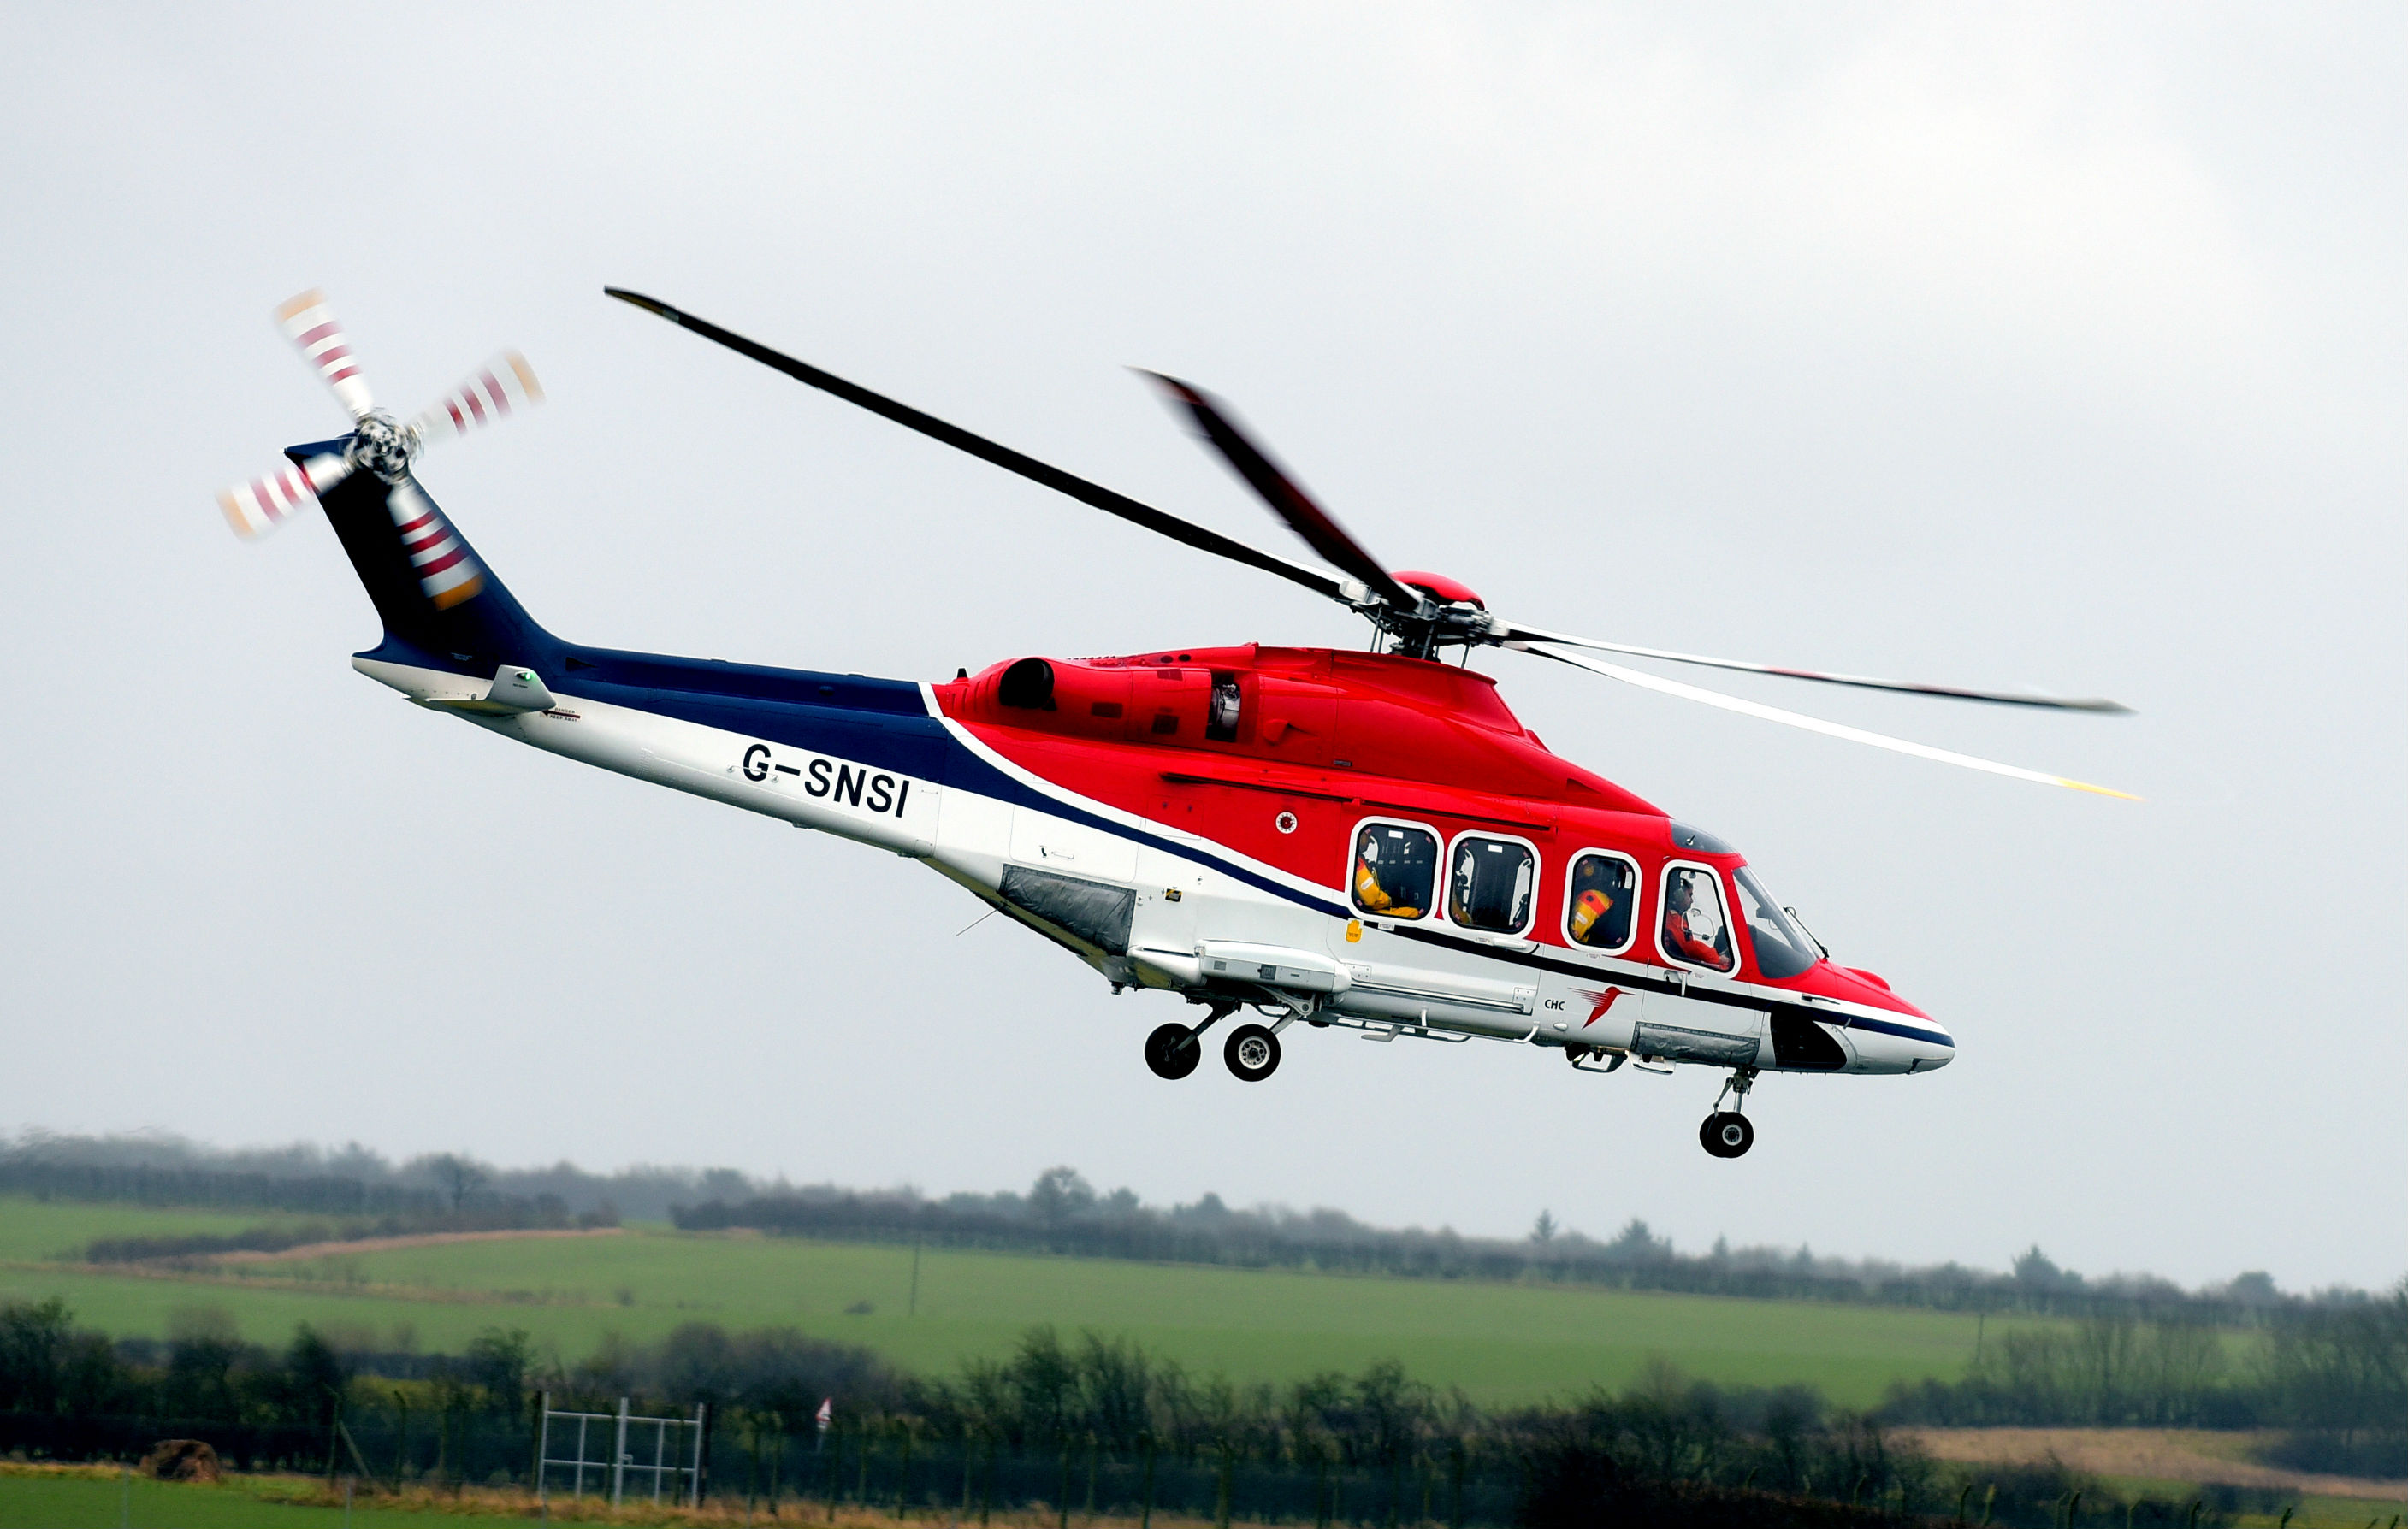 A combination of Leonardo AW139 (pictured here) and AW169 helicopters will begin flying out of Humberside heliport from April 2018 to support the construction and support phases of Ørsted's Hornsea Project One—which is expected to be the largest wind farm in the world. CHC Photo